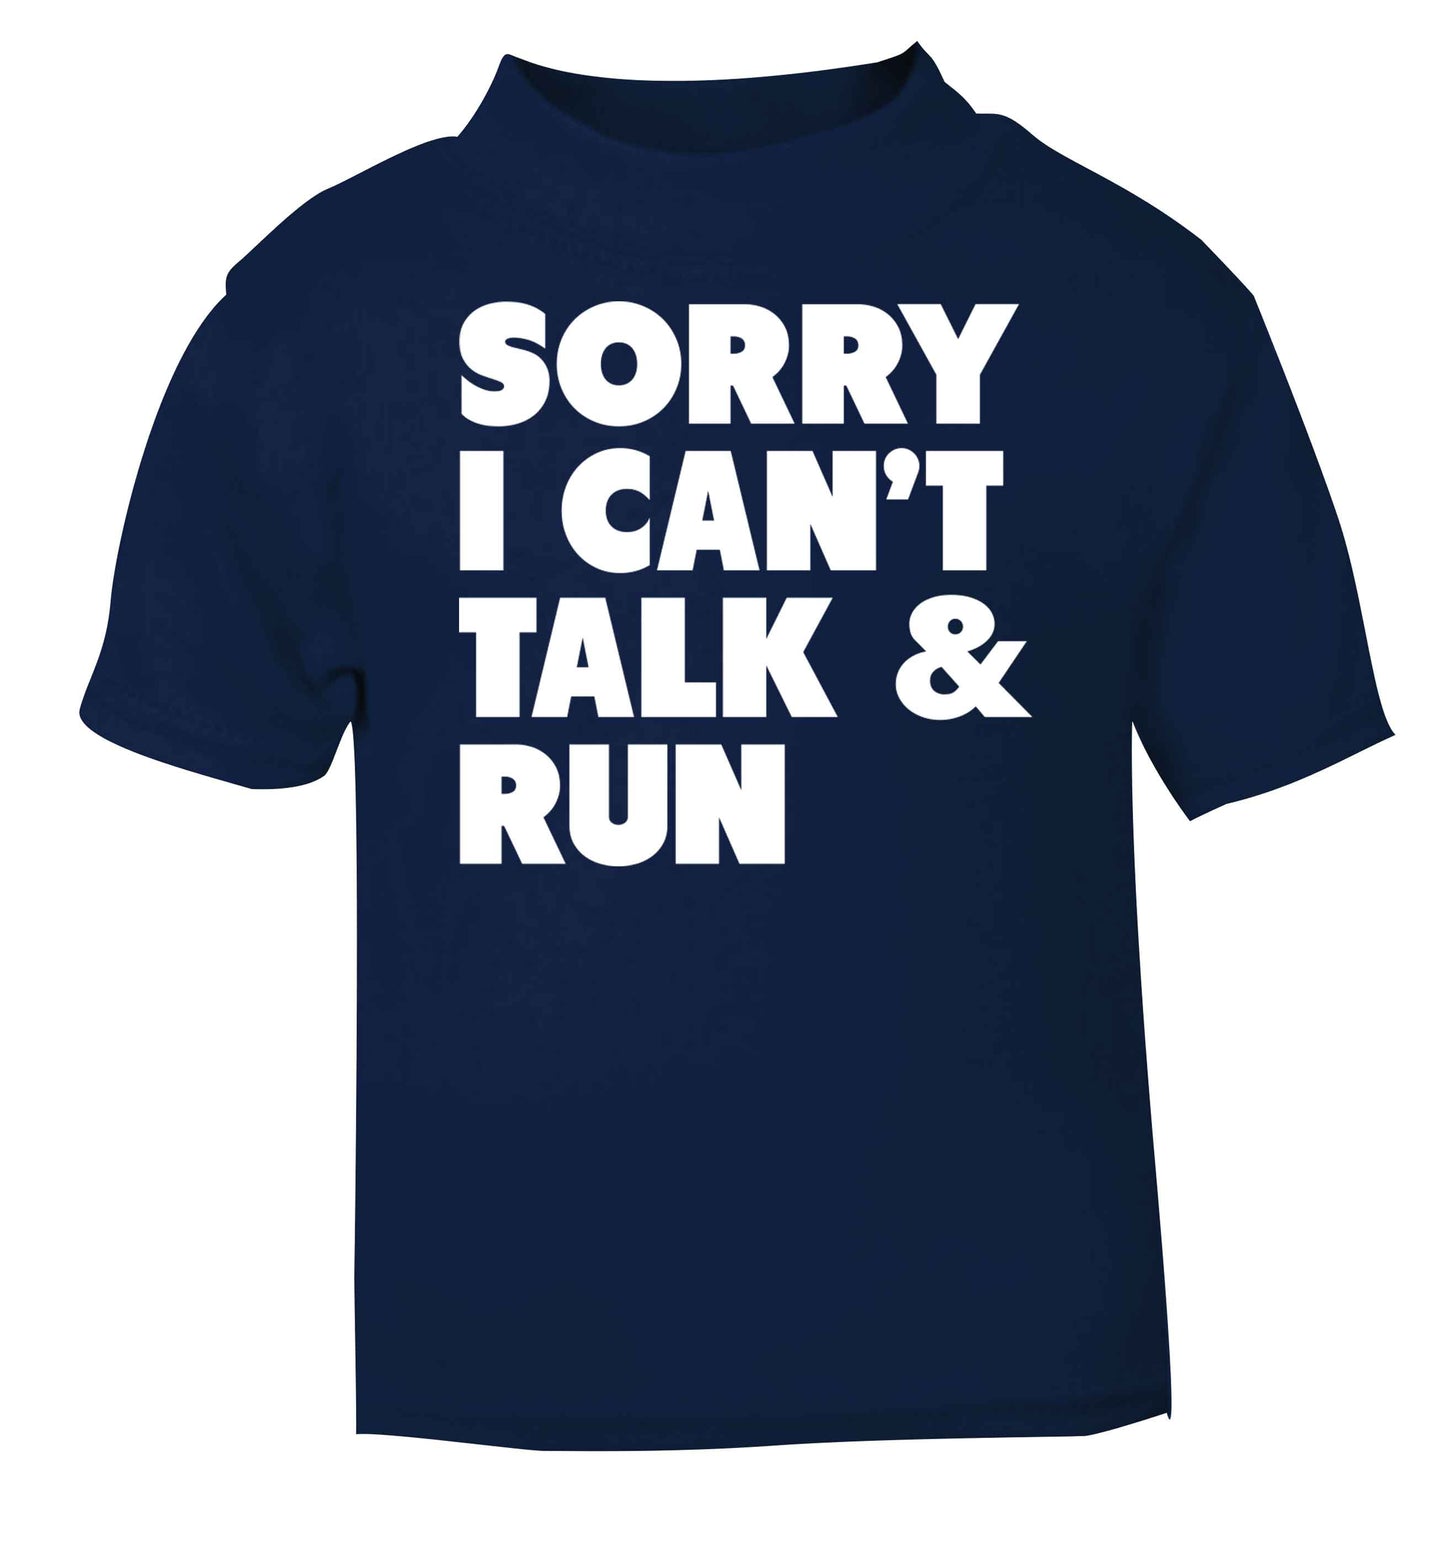 Sorry I can't talk and run navy baby toddler Tshirt 2 Years